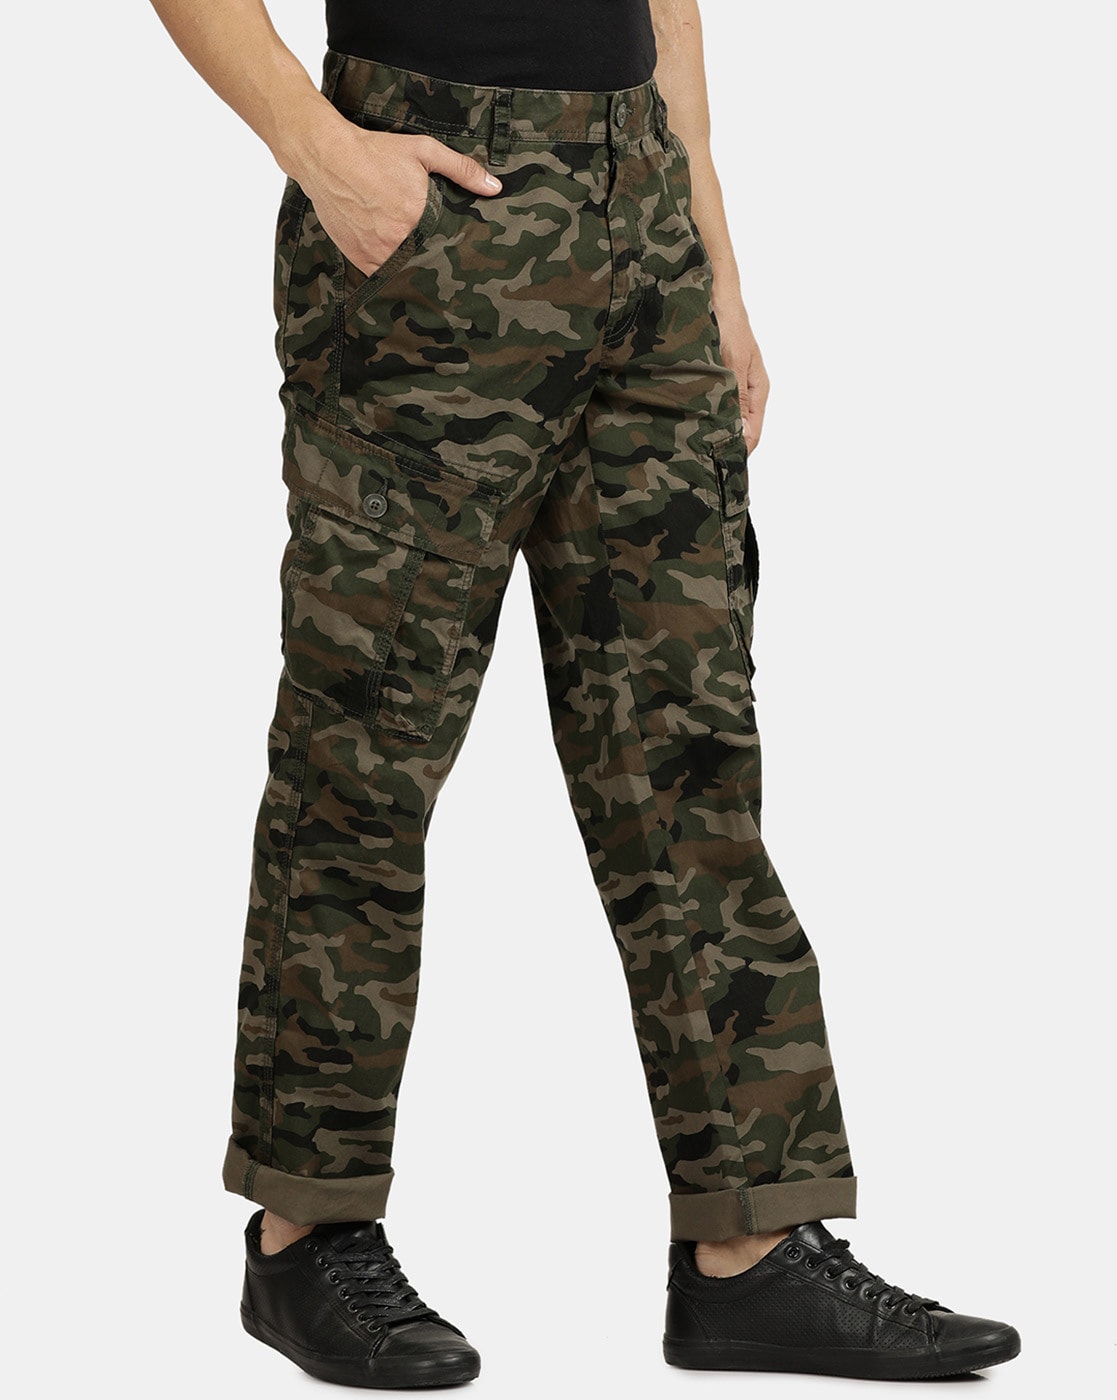 mens military style cargo pants in gold with studs and crystals